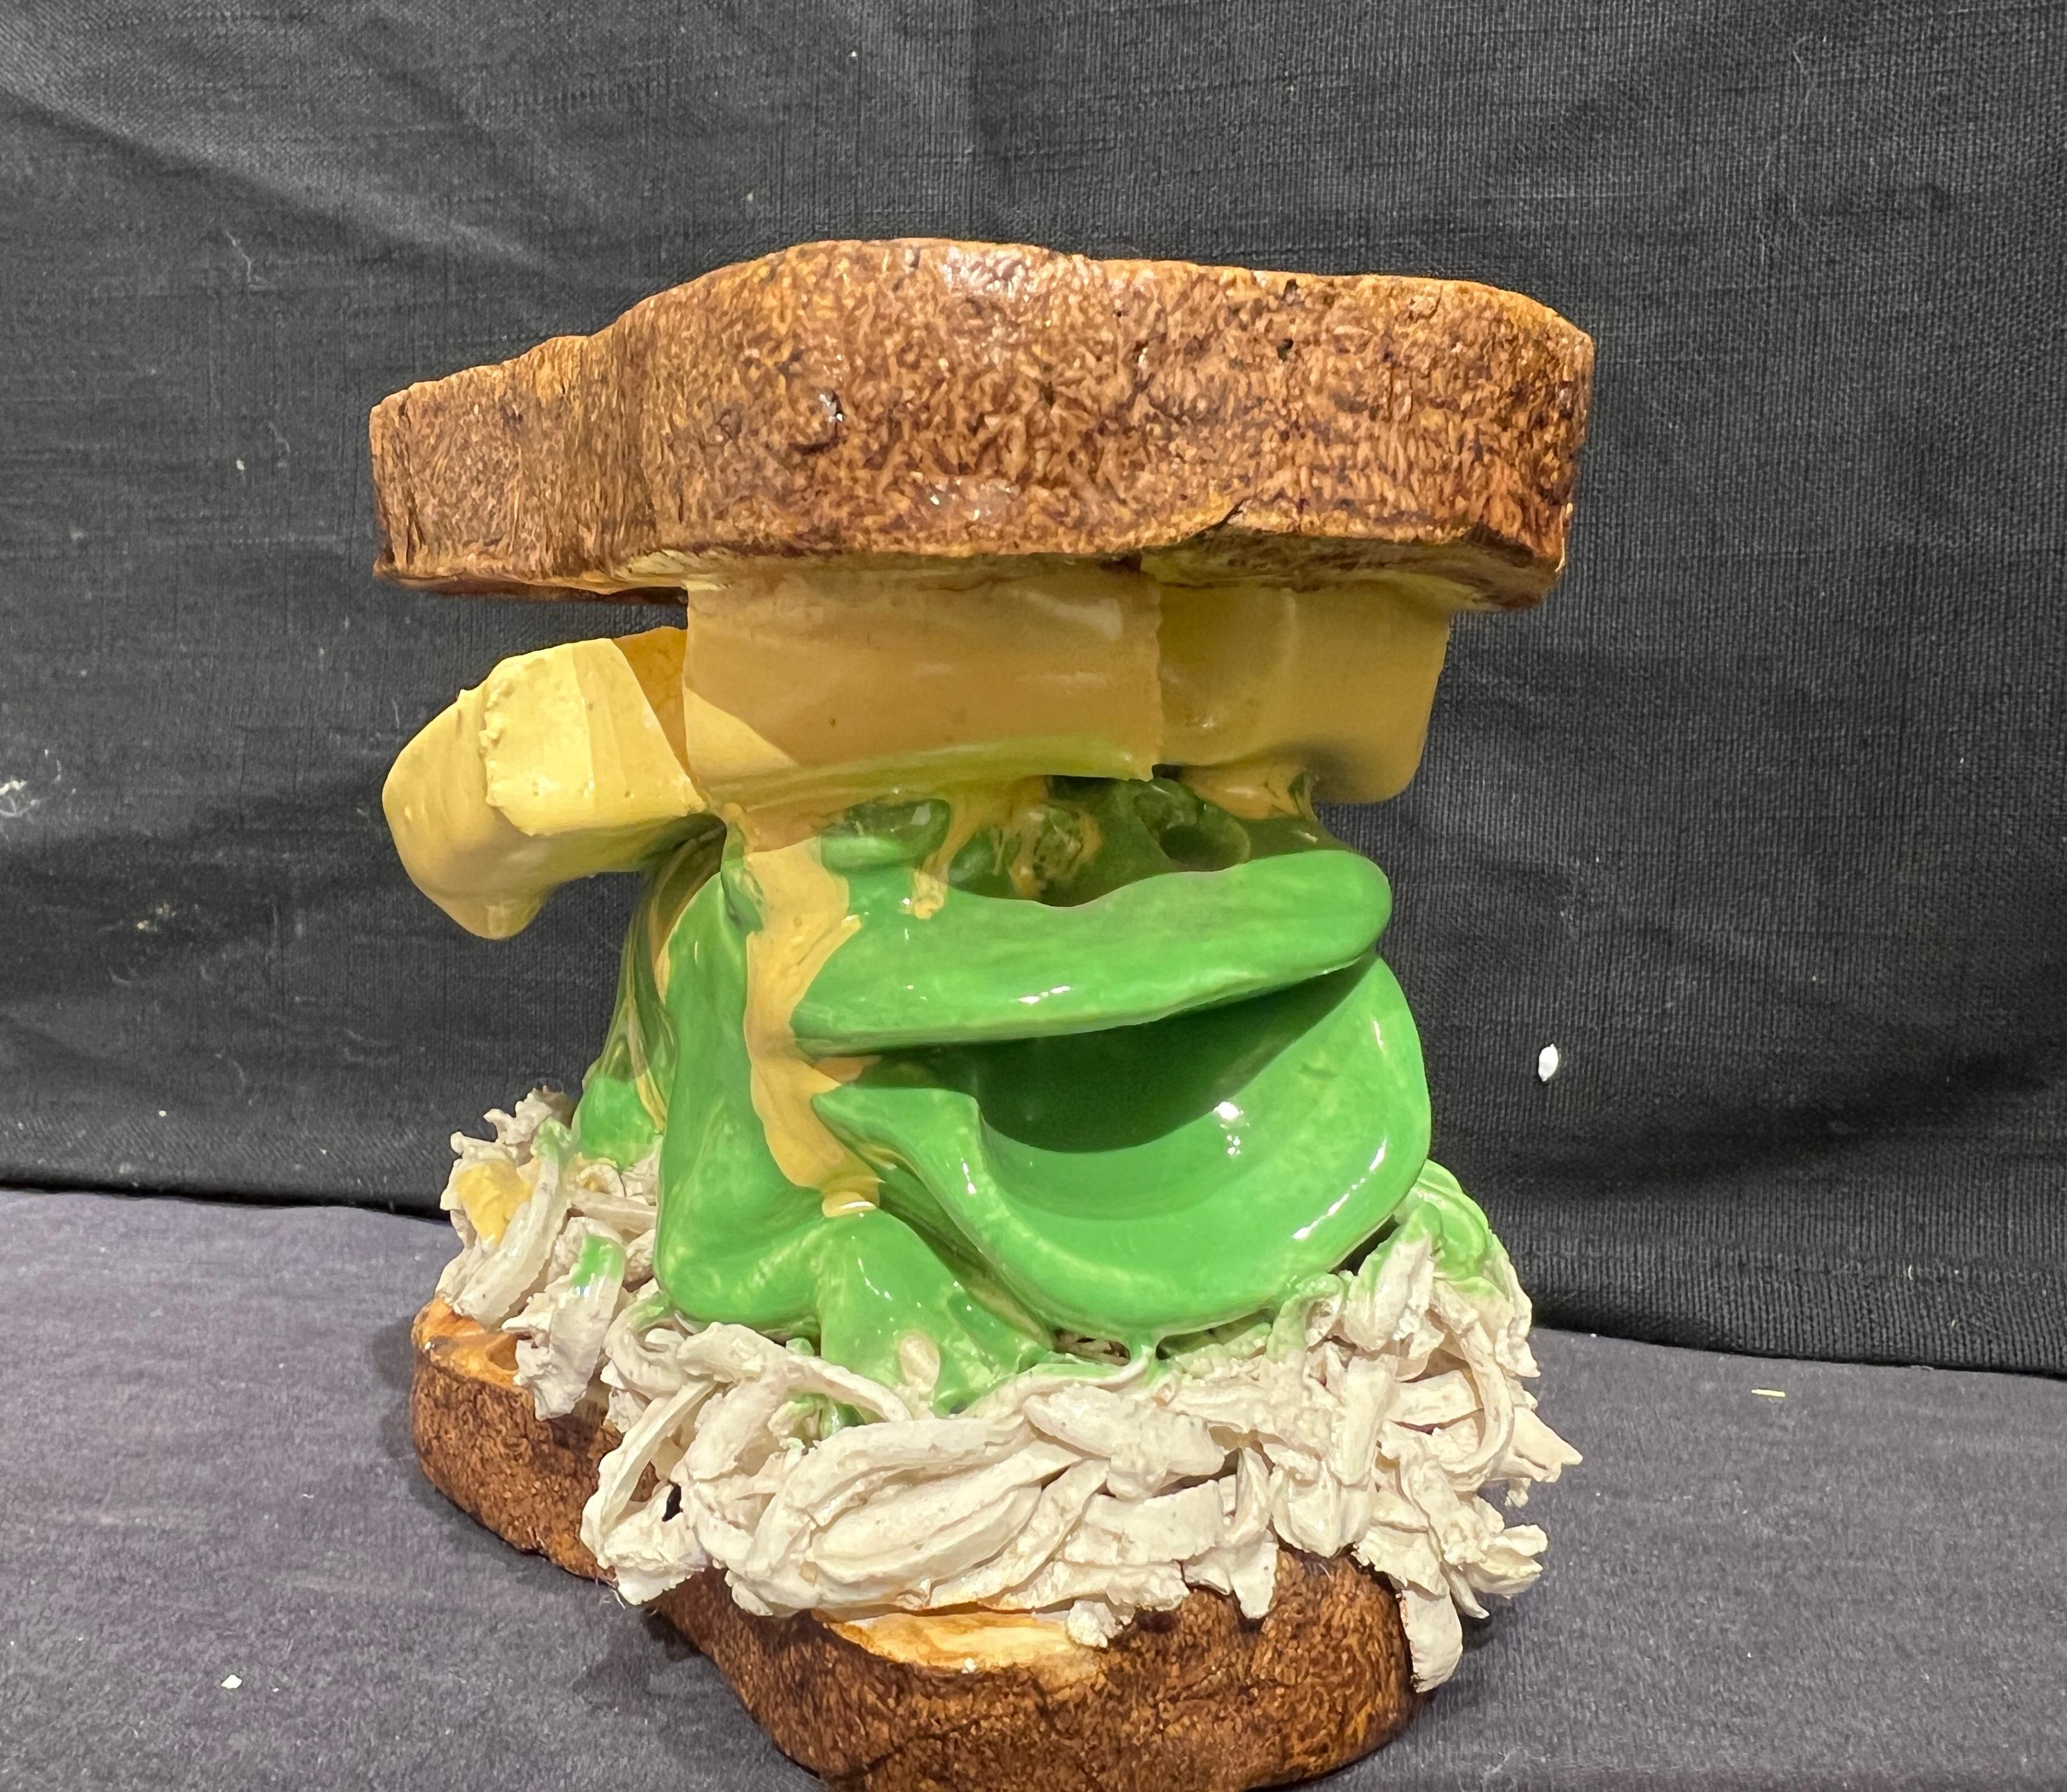 Frog and Swiss on Rye